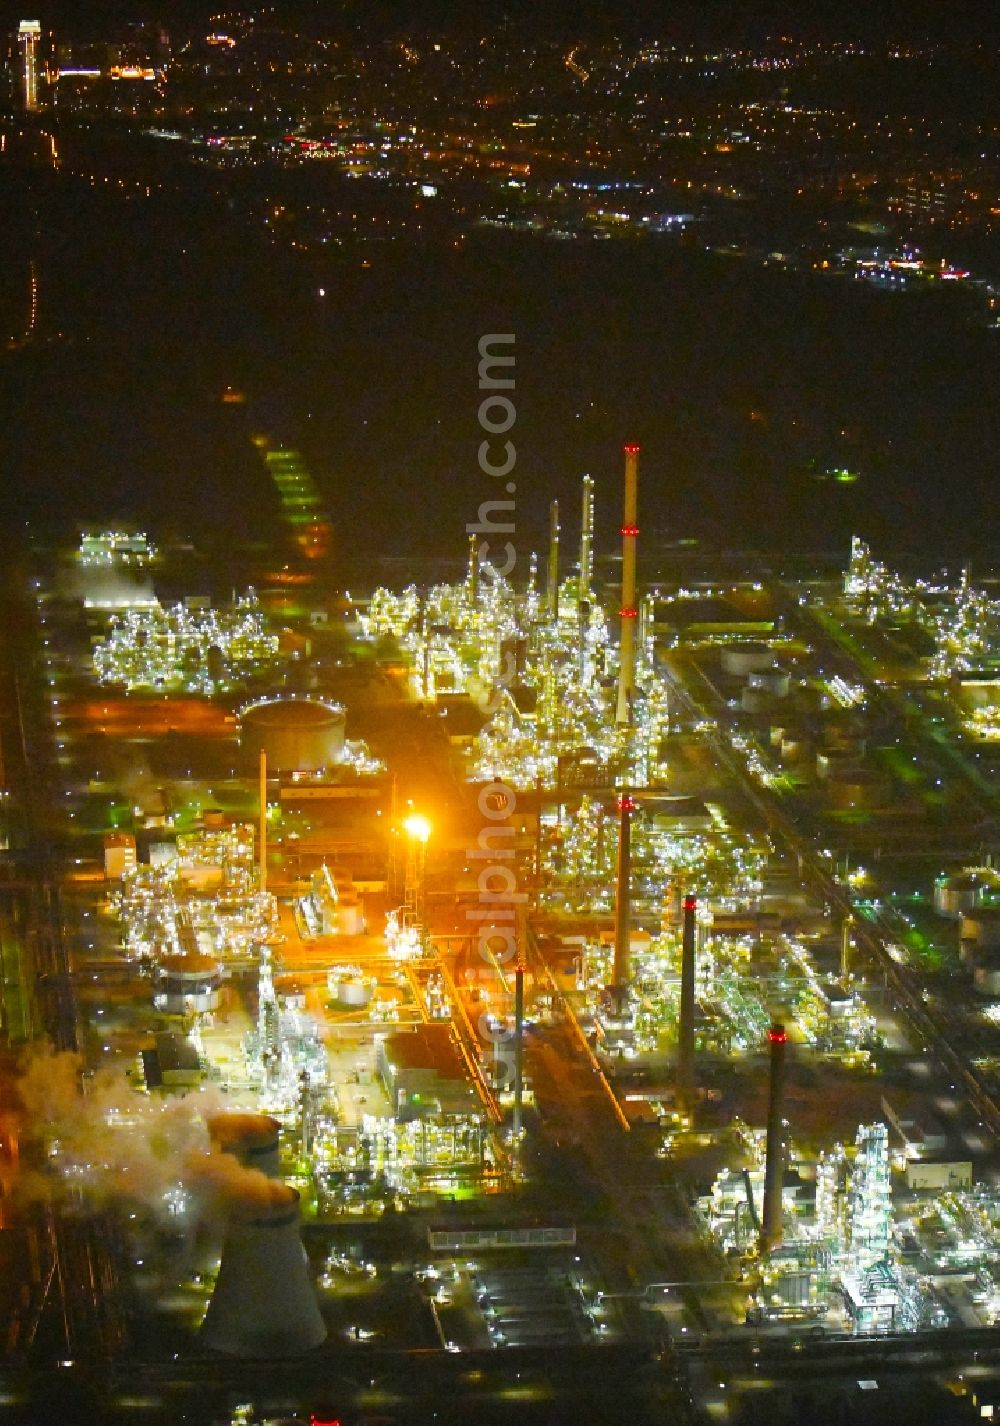 Schwedt/Oder at night from above - Night lighting Site of PCK Refinery GmbH, a petroleum processing plant in Schwedt / Oder in the northeast of the state of Brandenburg